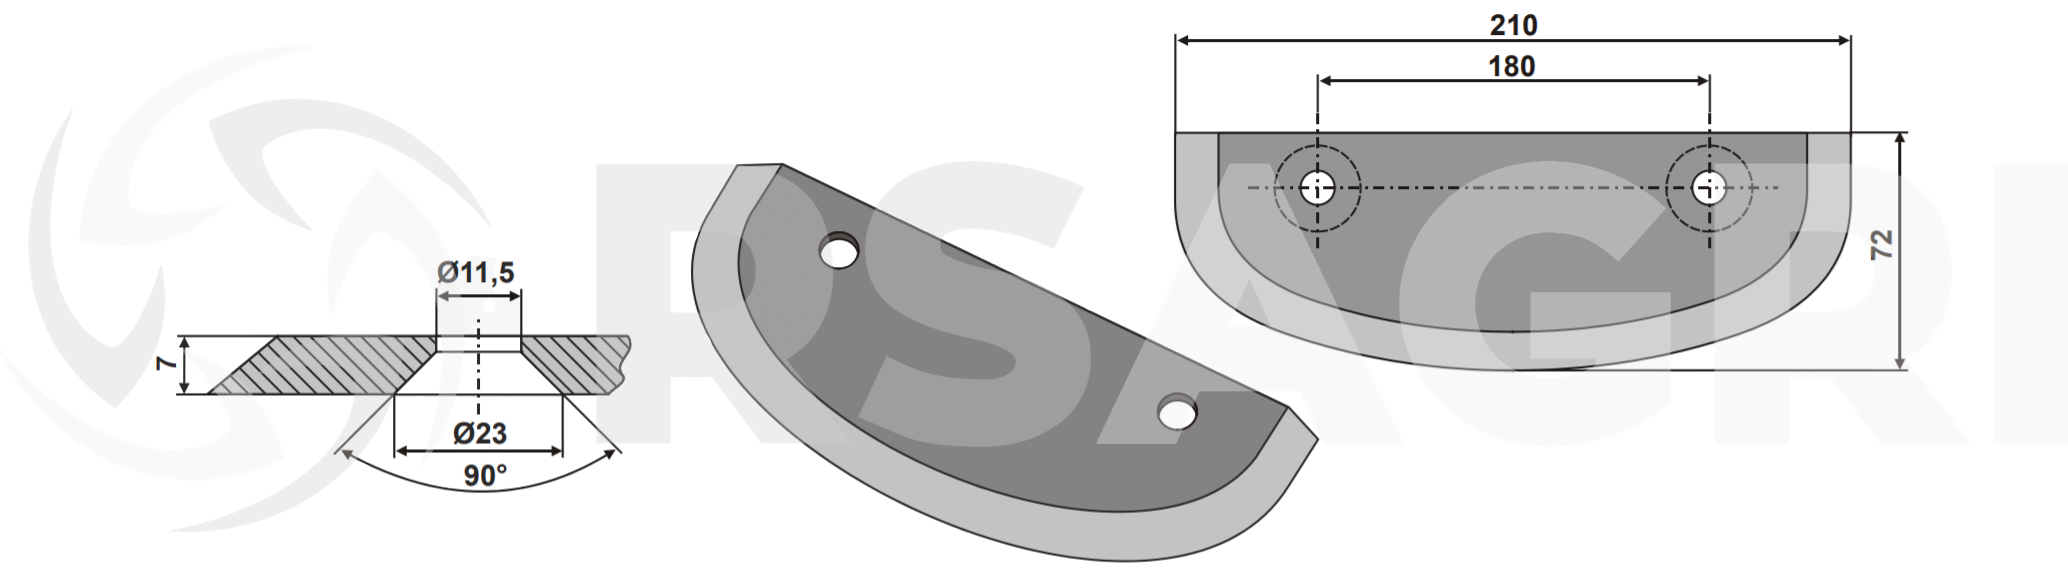 RMH front oval diet feeder blade